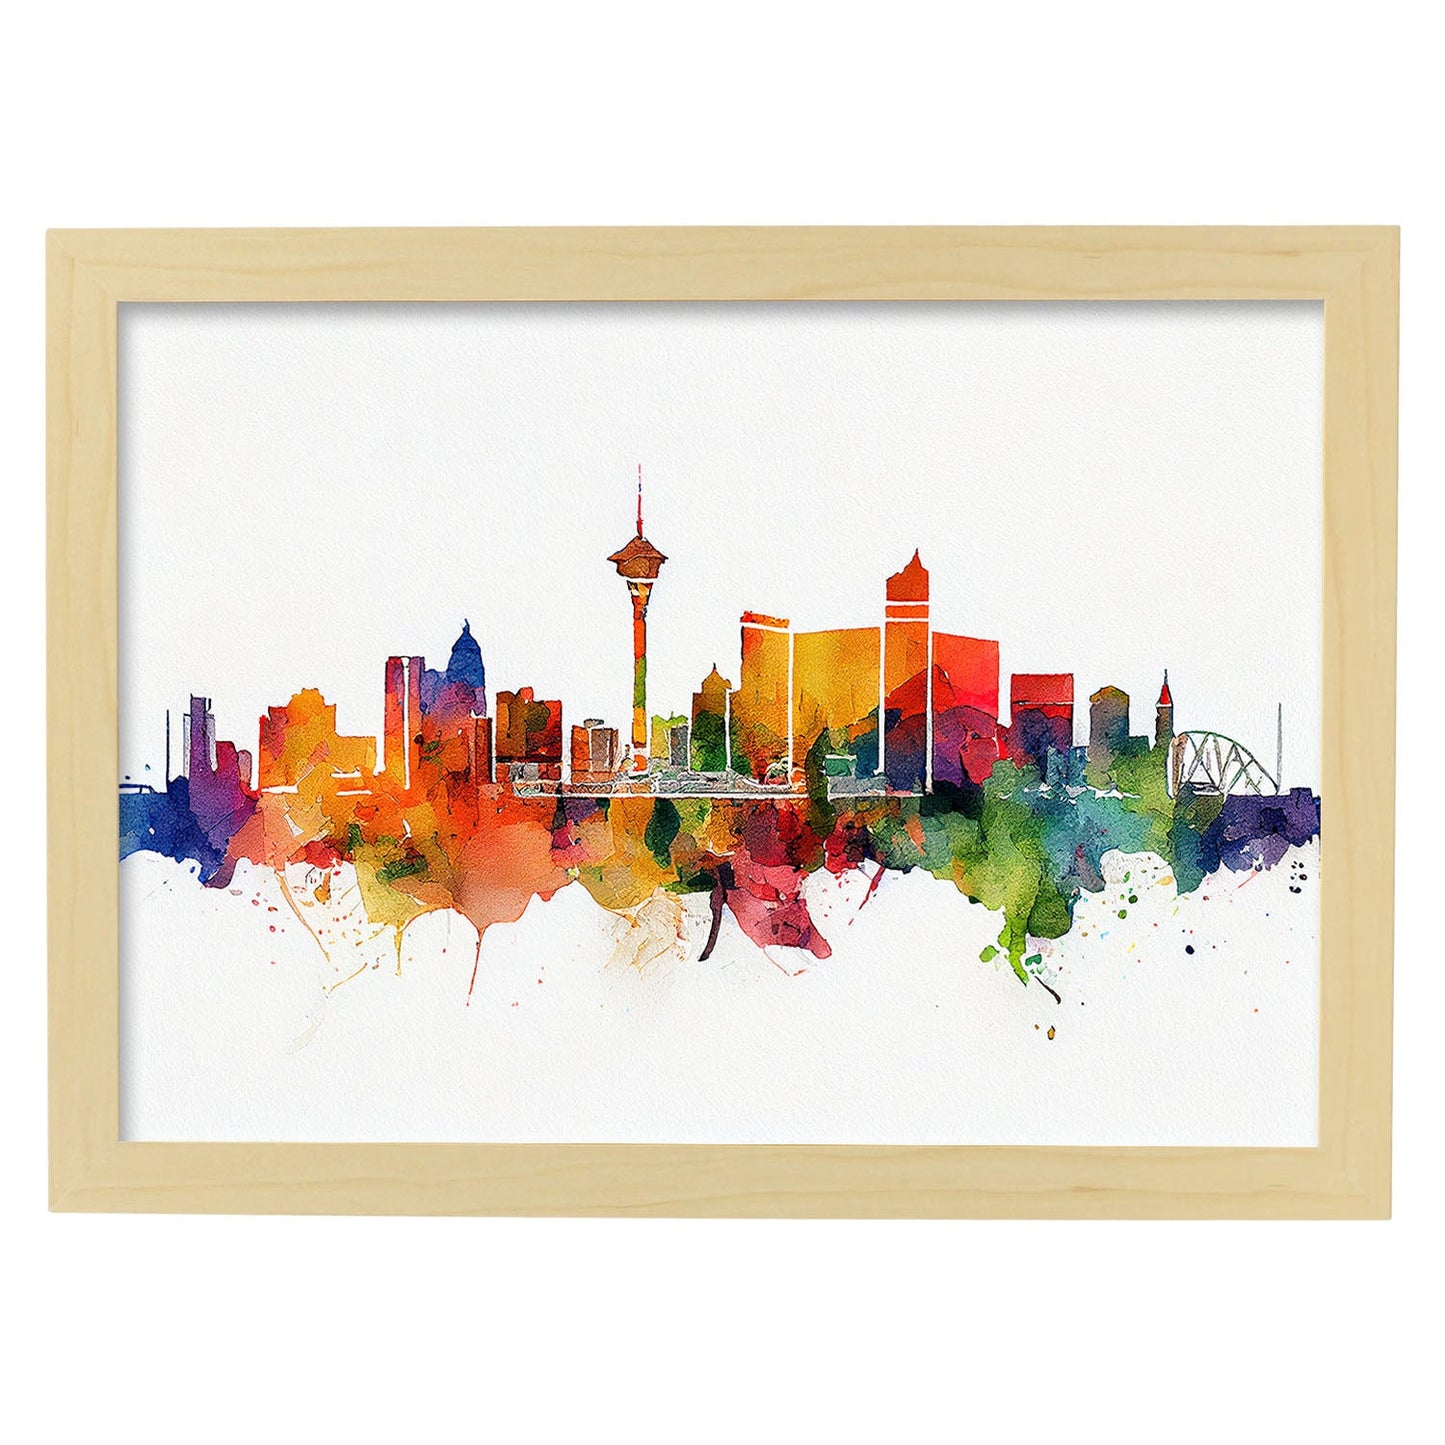 Nacnic watercolor of a skyline of the city of Las Vegas_2. Aesthetic Wall Art Prints for Bedroom or Living Room Design.-Artwork-Nacnic-A4-Marco Madera Clara-Nacnic Estudio SL